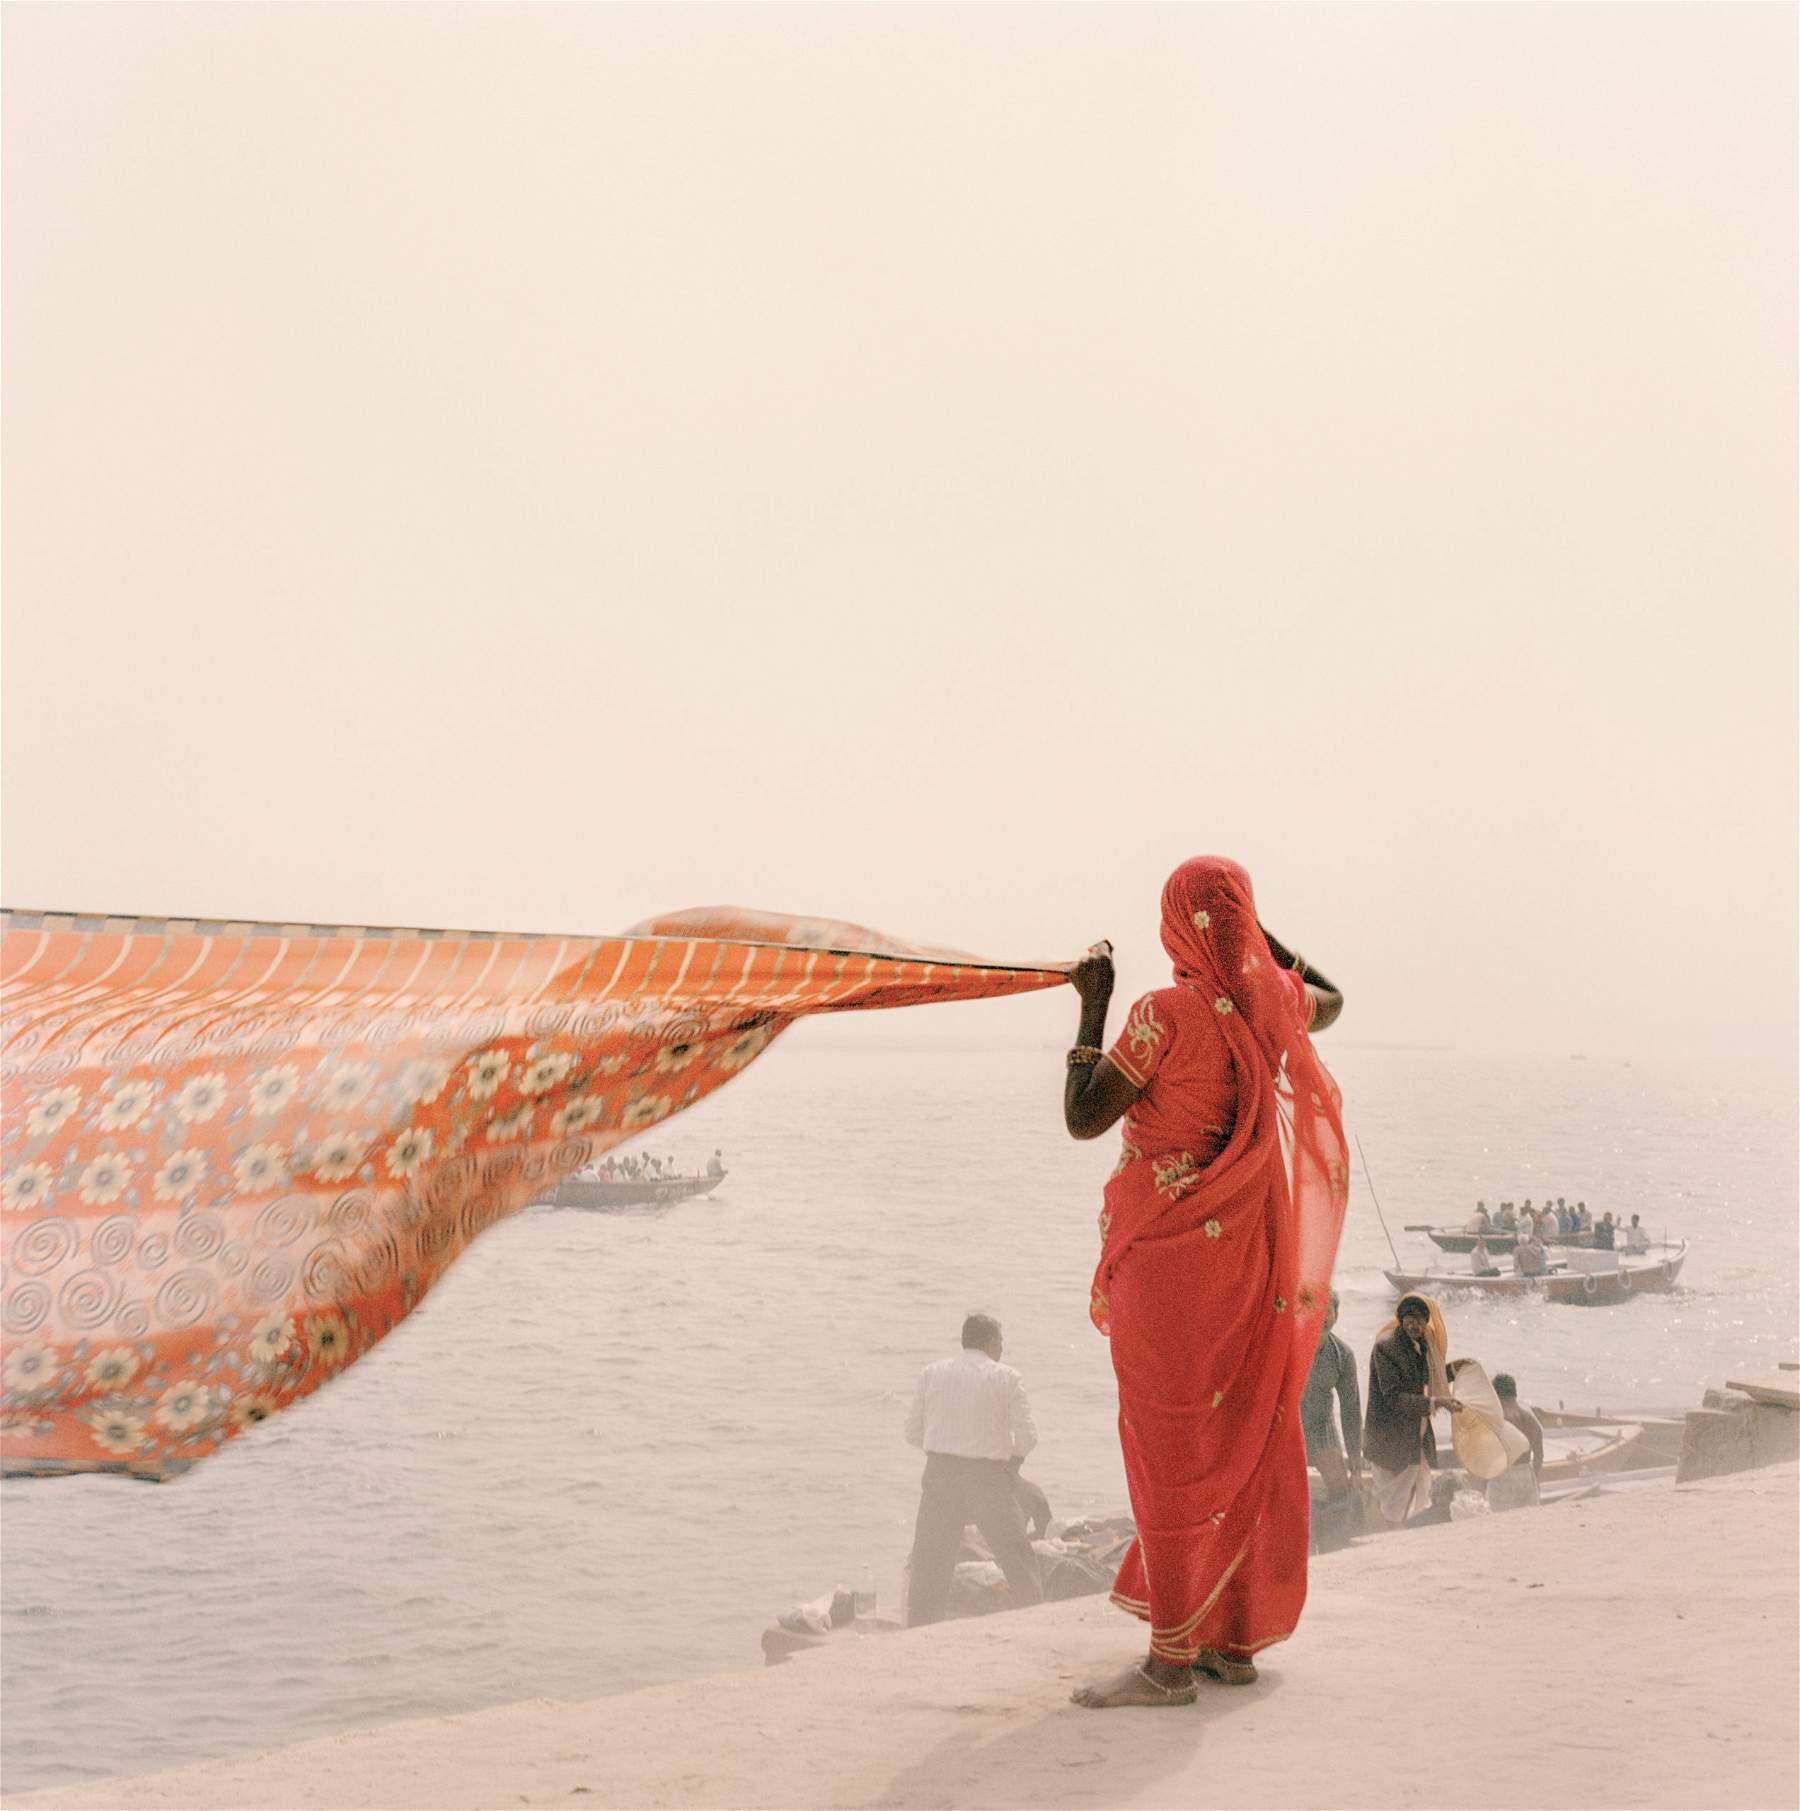 The Ganges in the photographs of Giulio Di Sturco on display at the Bocconi University of Milan